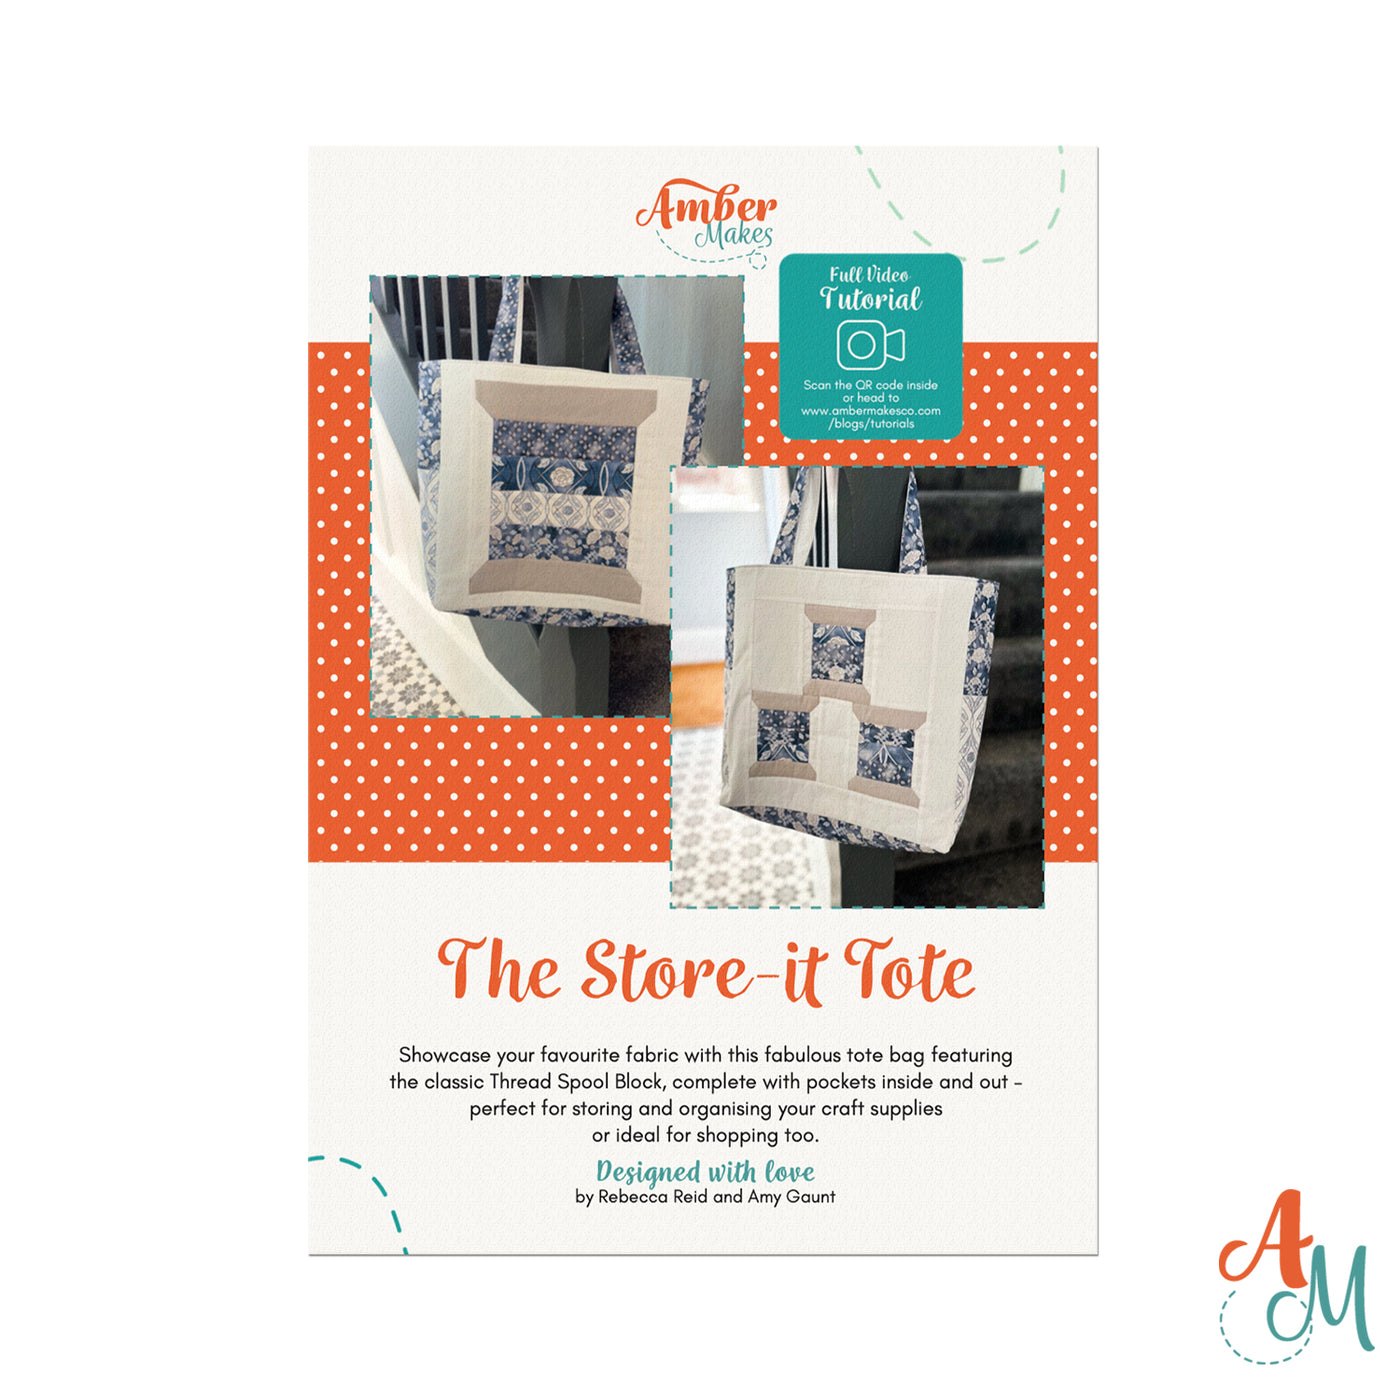 The Store-it Tote - Printed Instructions Booklet